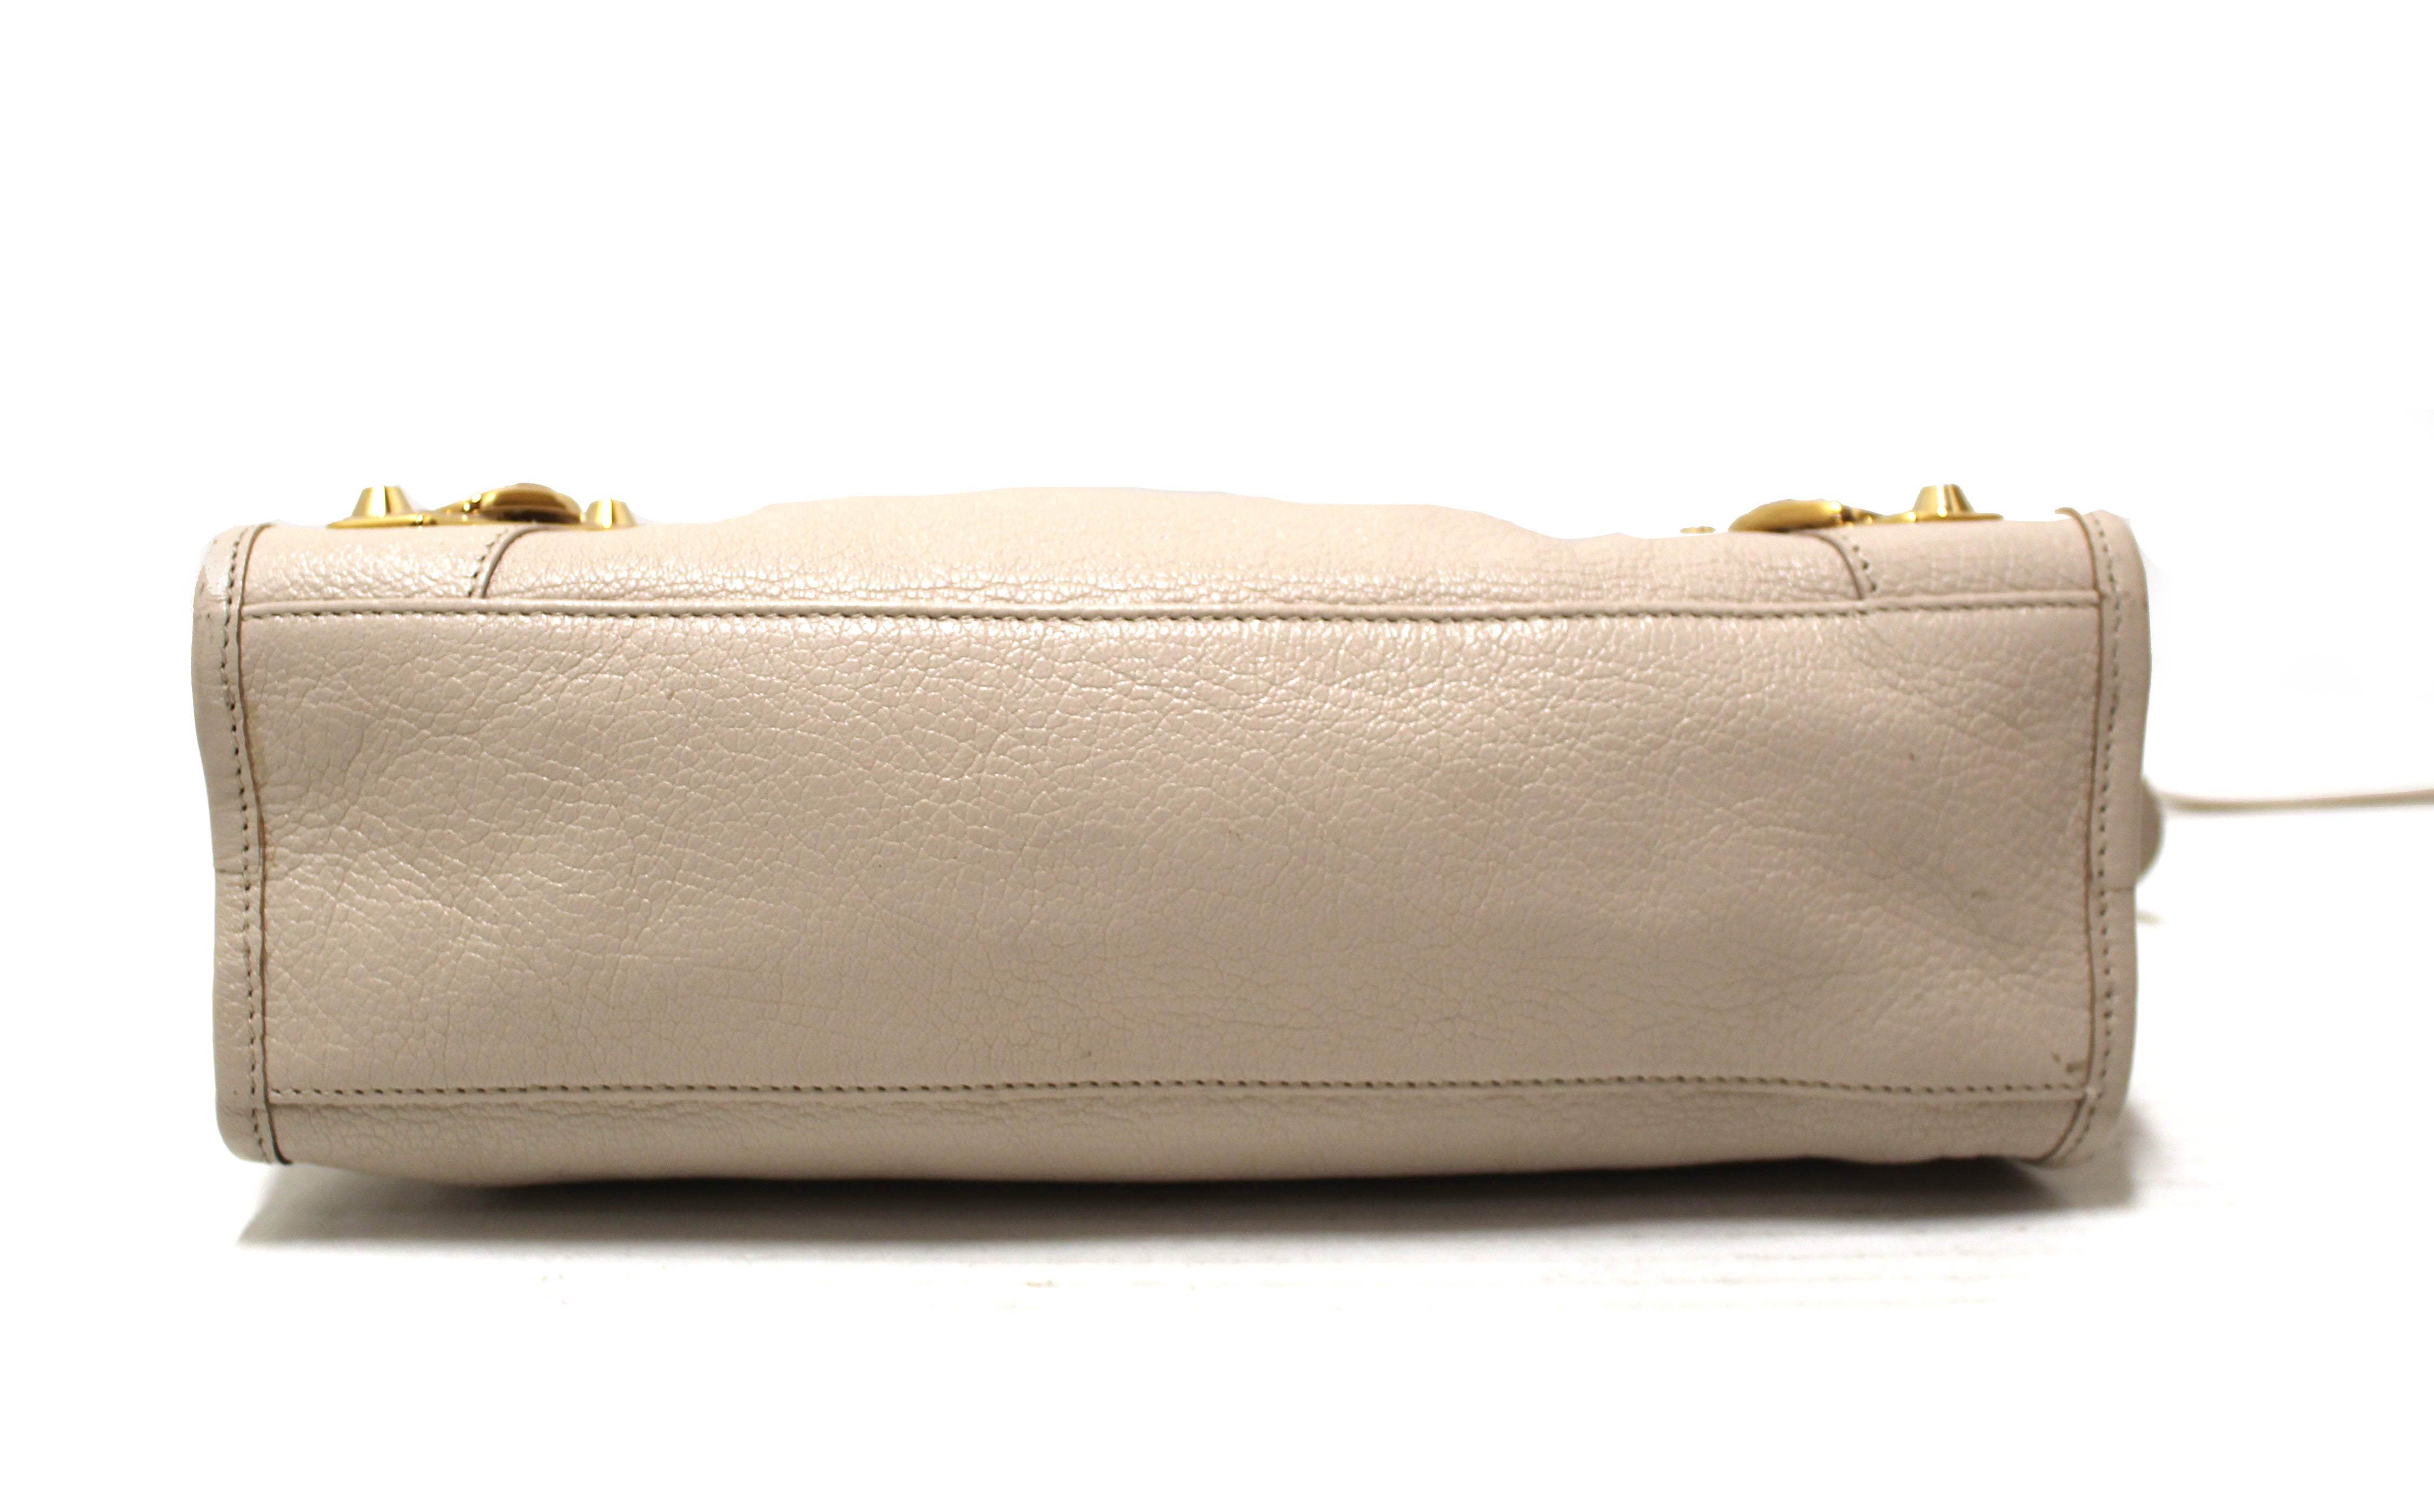 Authentic Balenciaga Ivory Classic City Small Lambskin Leather Shoulder Bag